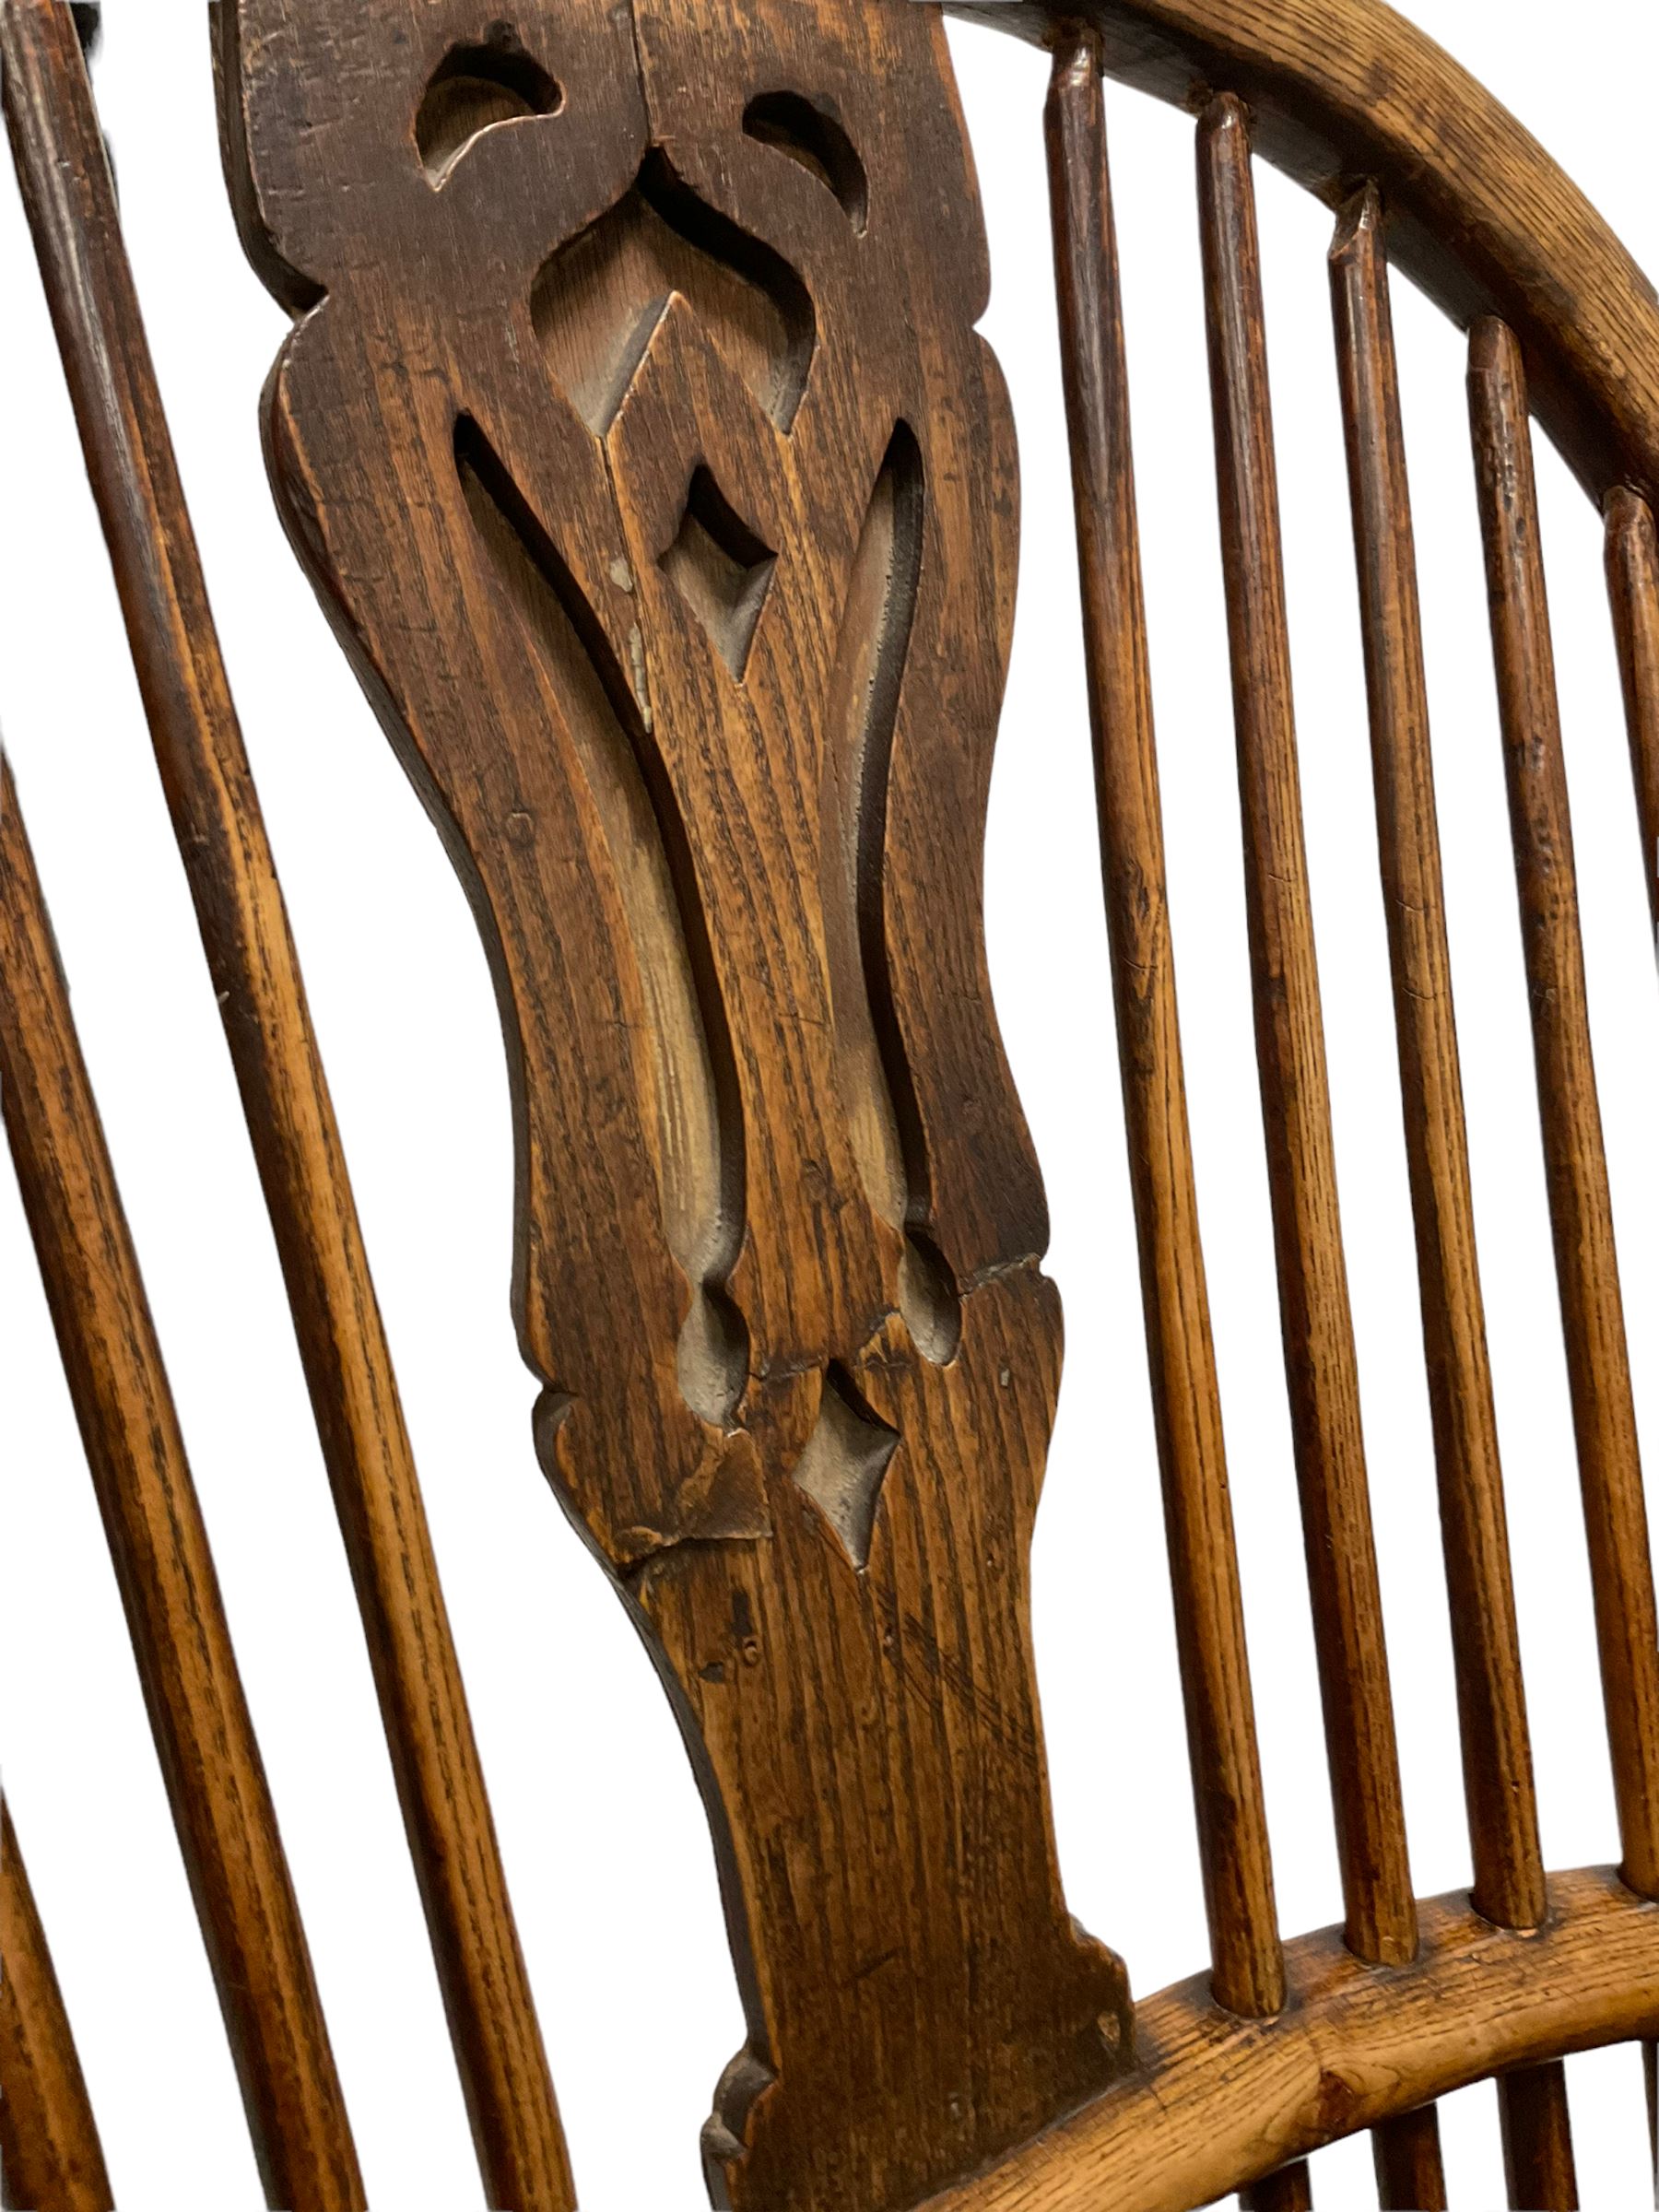 Early 19th century Windsor armchair - Image 3 of 5